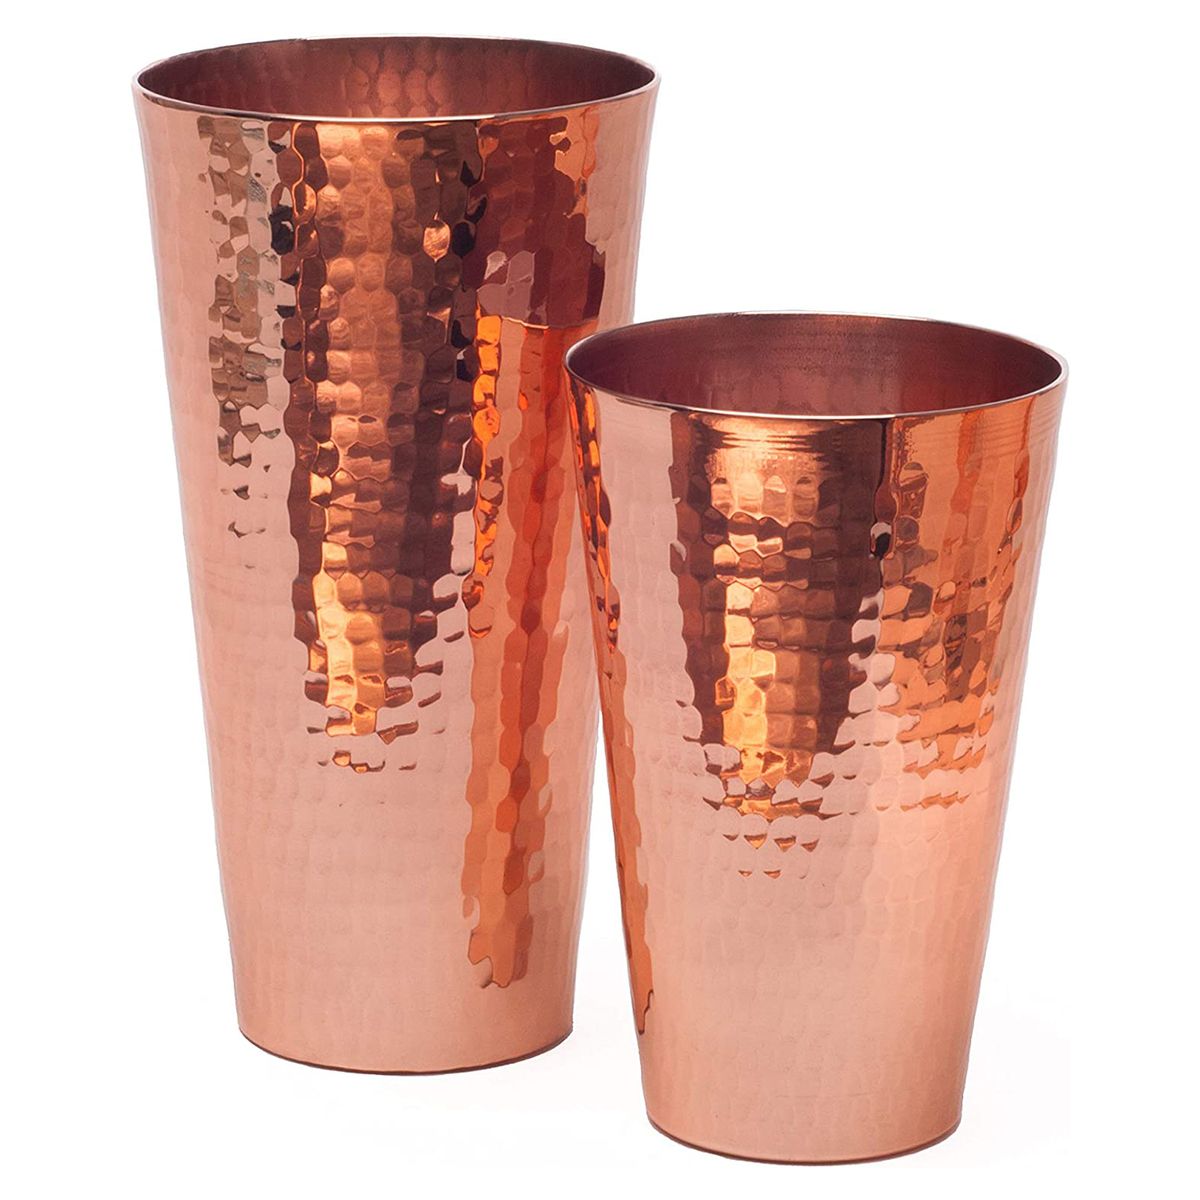 Best Cocktail Shakers